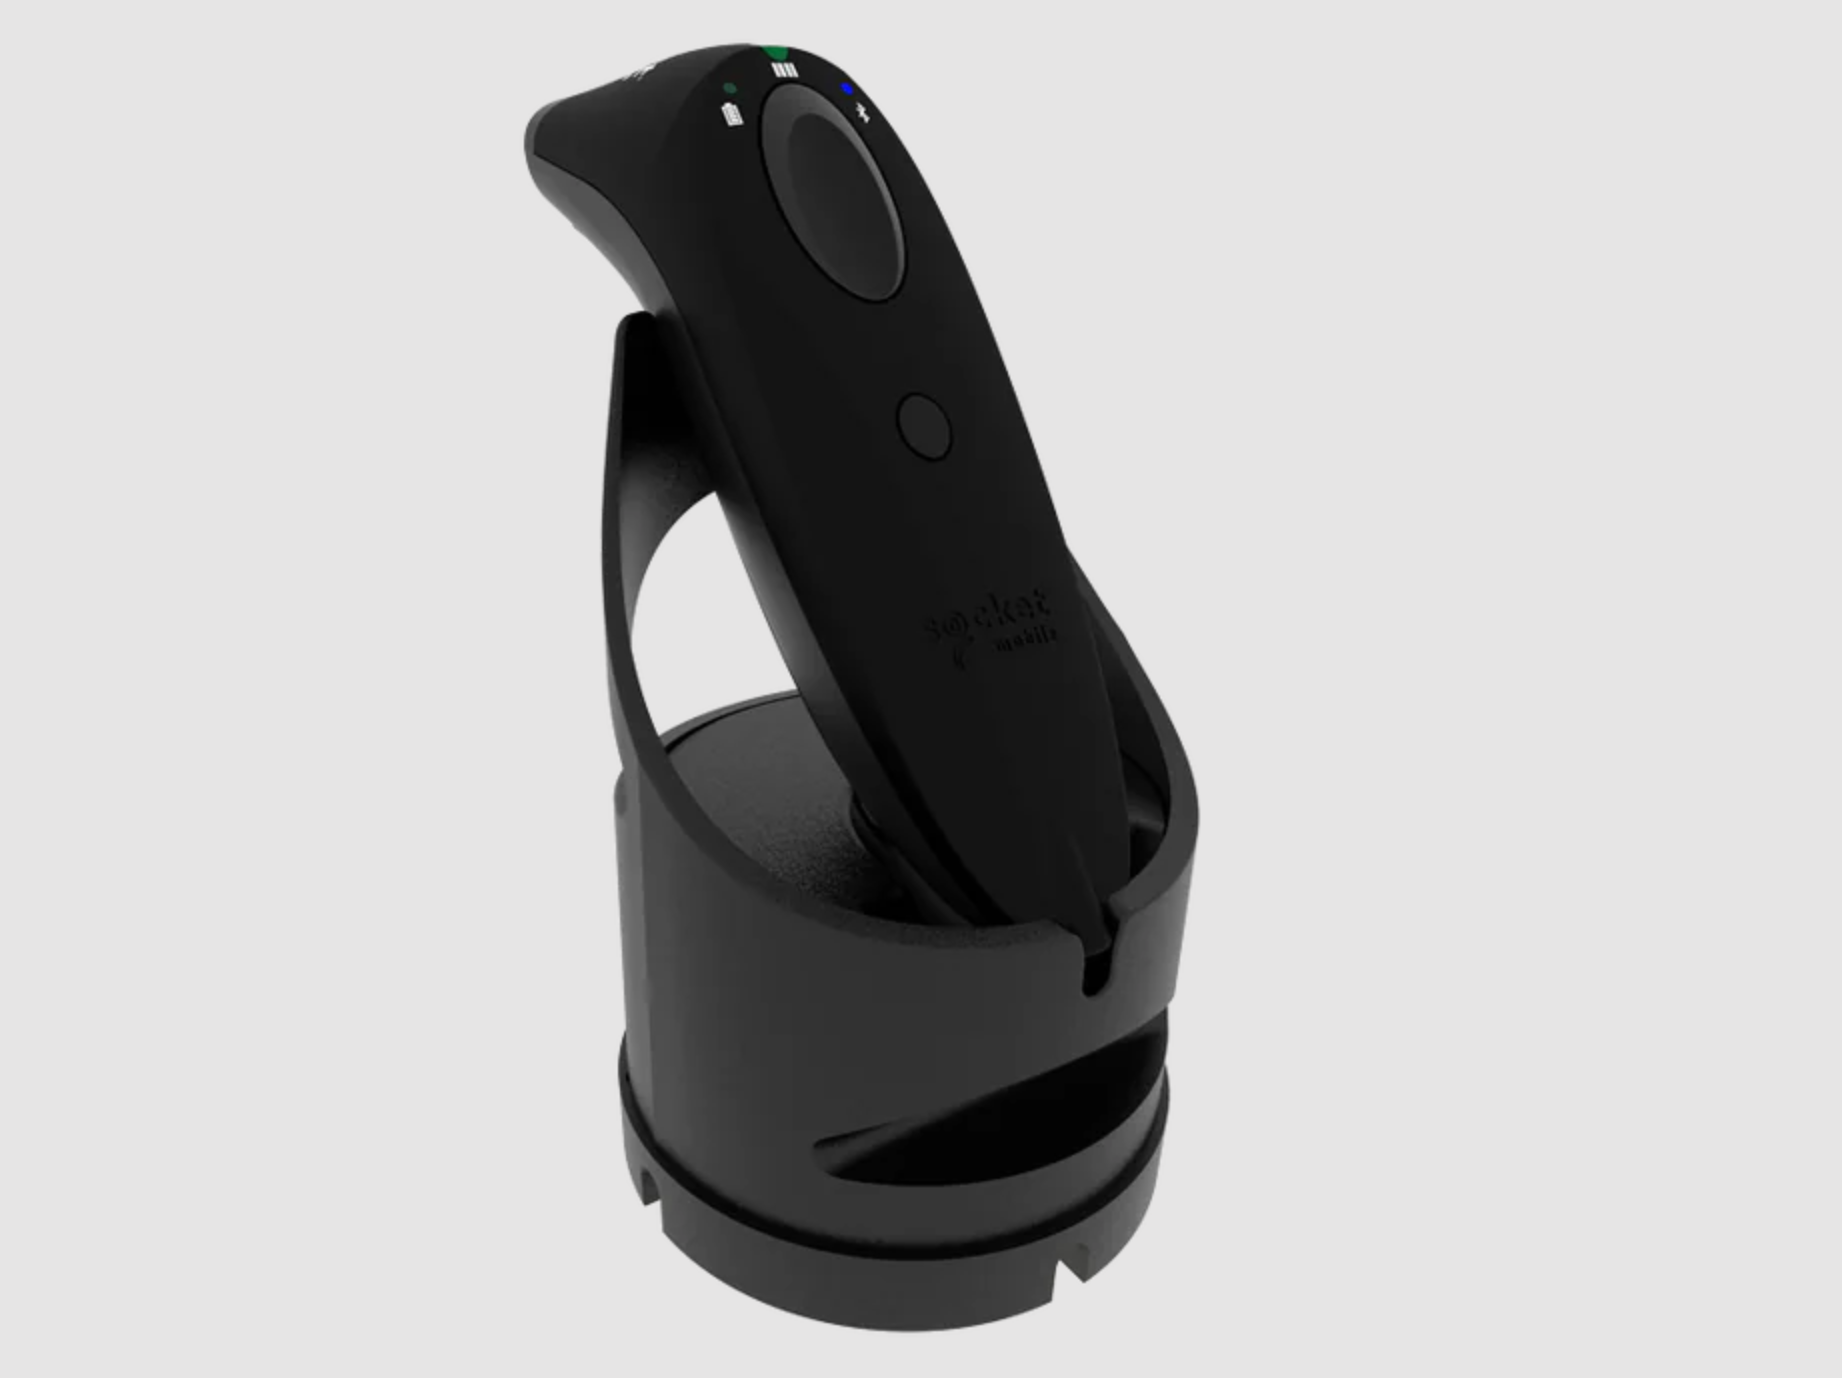 image of socket mobile barcode scanner number s720 offered by shopify